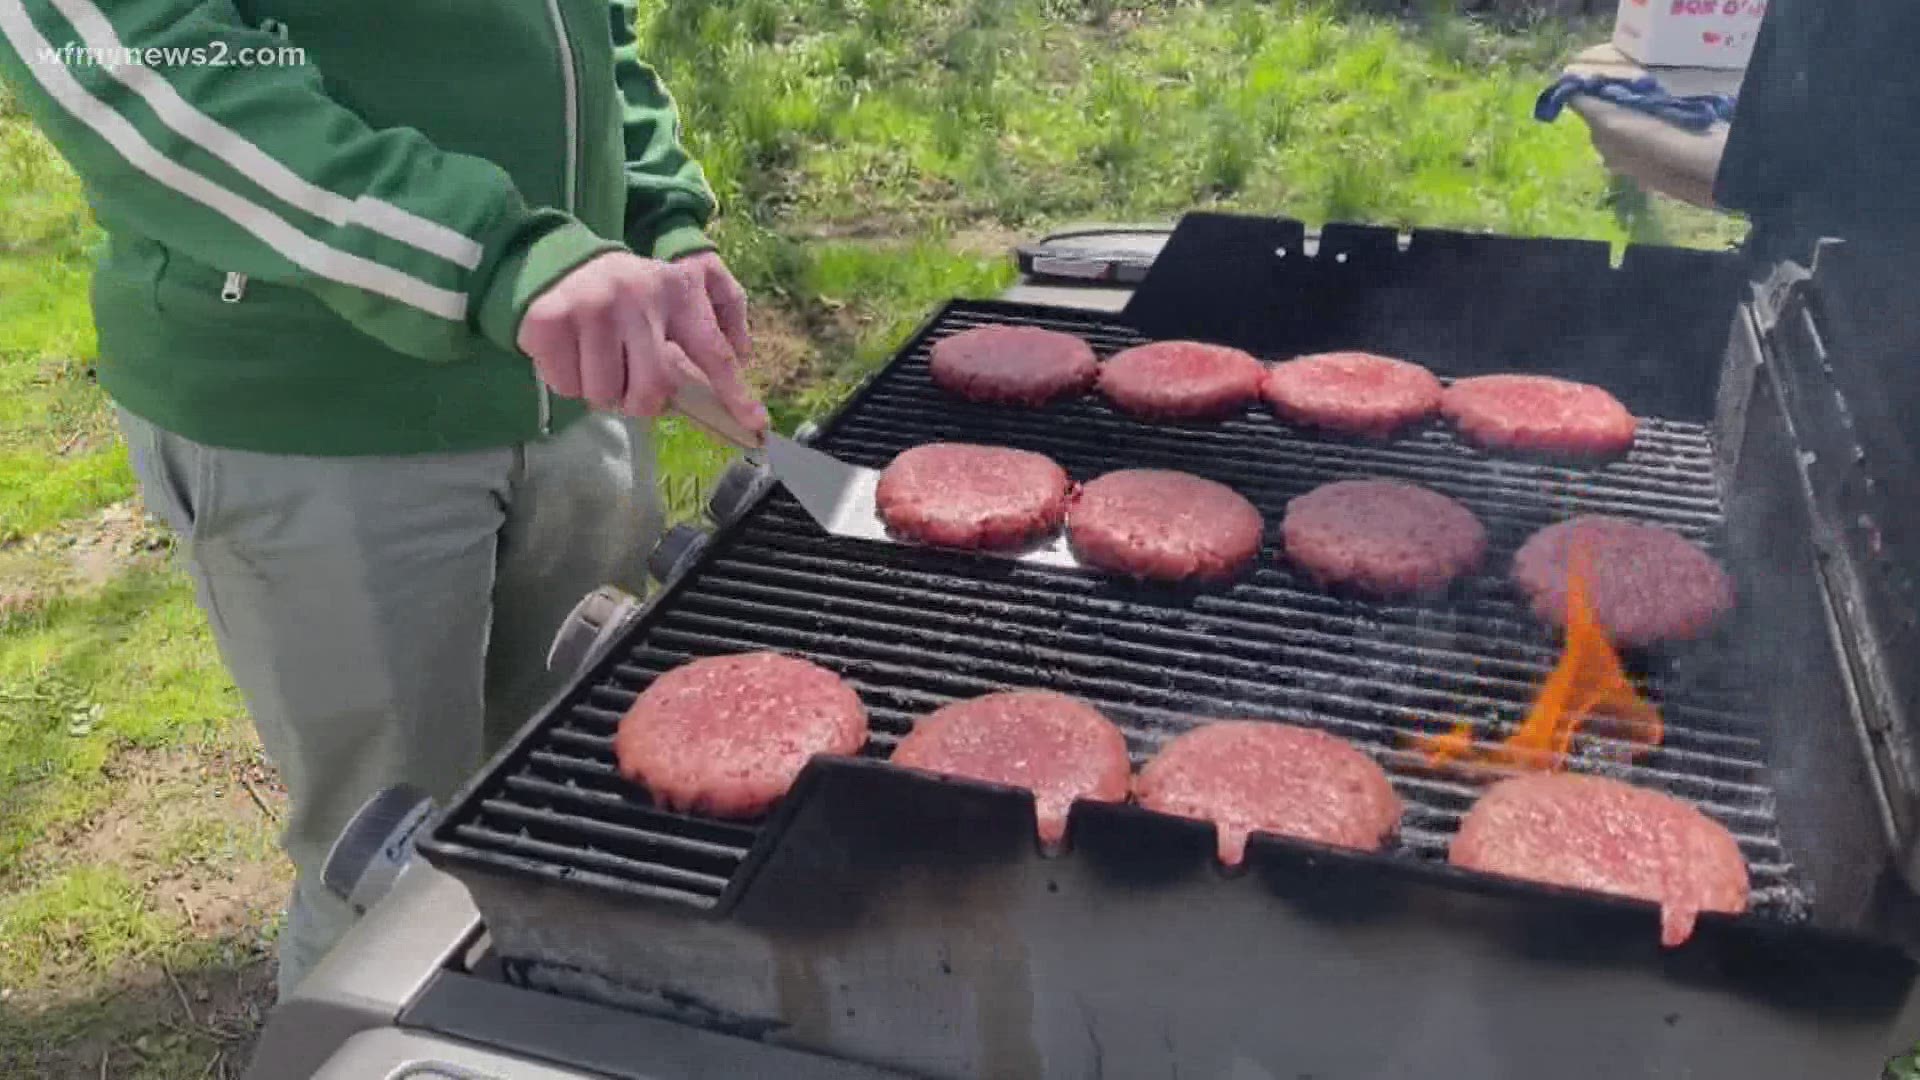 Consumer Reports considered things like flavor, cook time and mess when naming the best way to cook a patty.